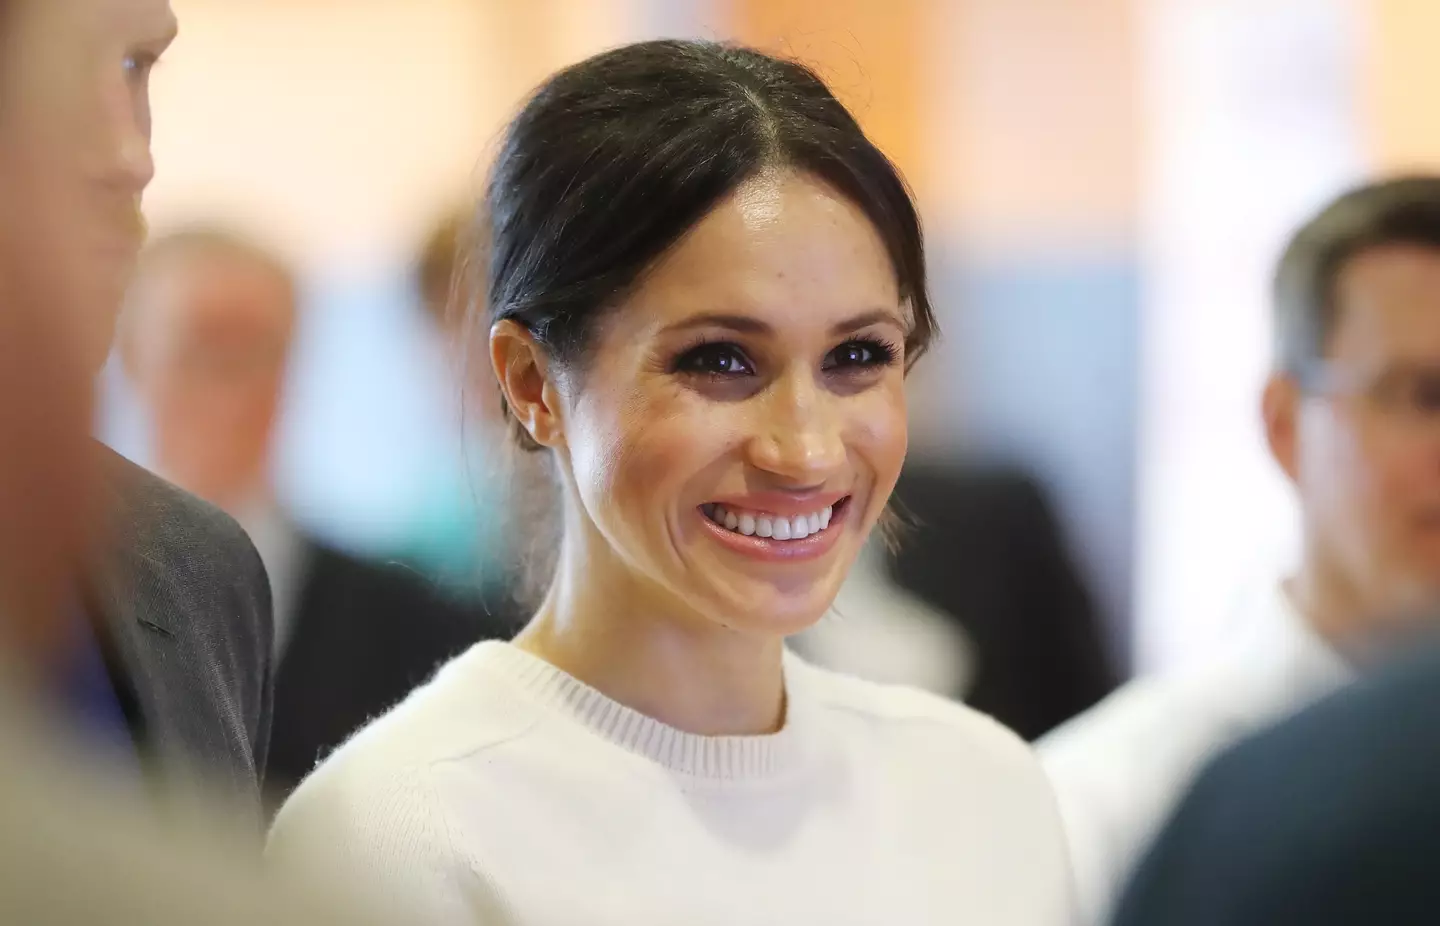 Meghan spoke about her own family life (